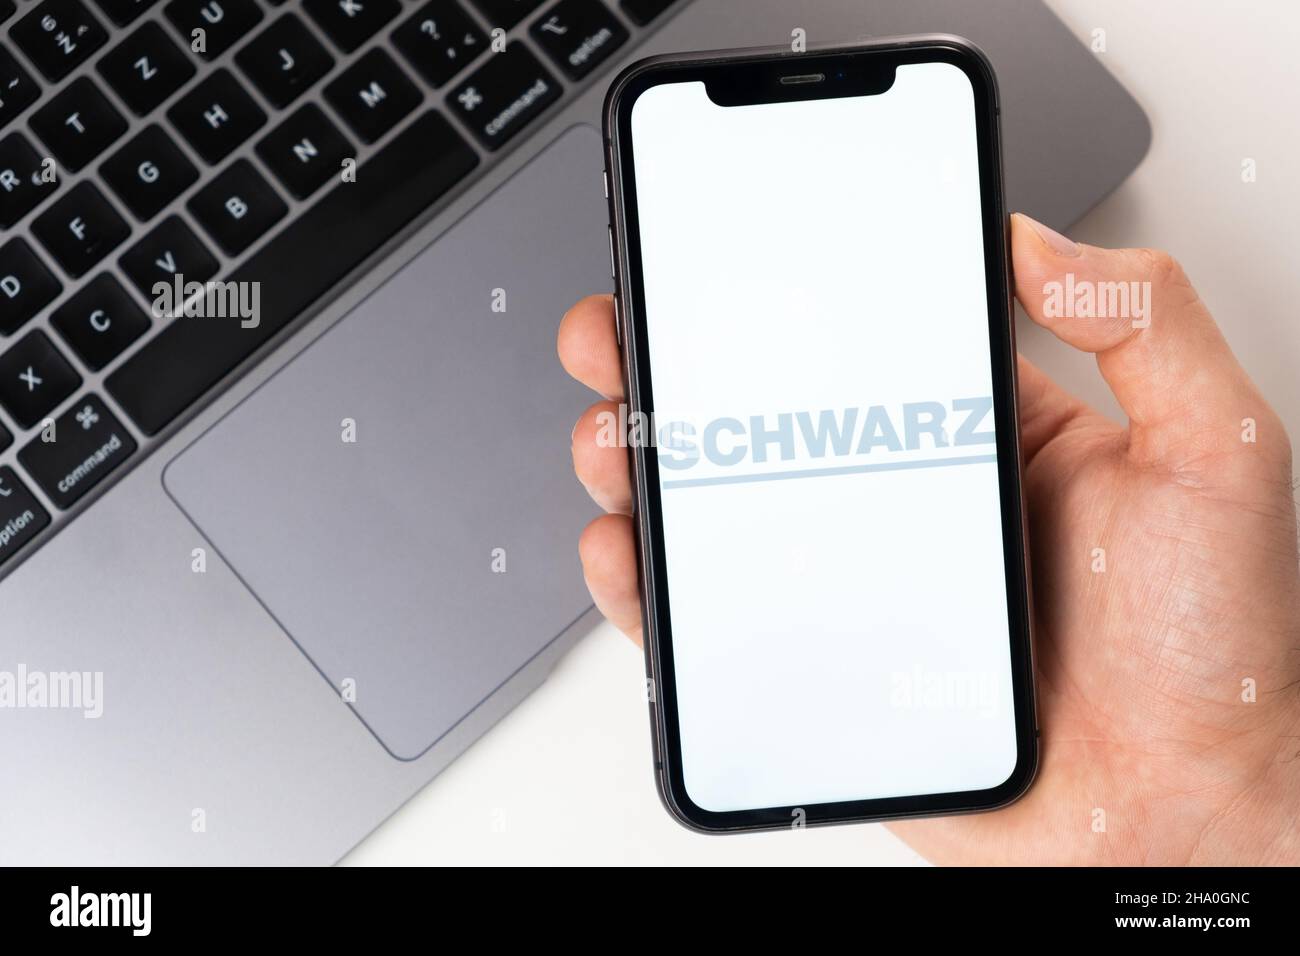 SCHWARZ mobile application on the smartphone screen. A mobile phone in a man hand near an open laptop. White background. November 2021, San Francisco, USA Stock Photo